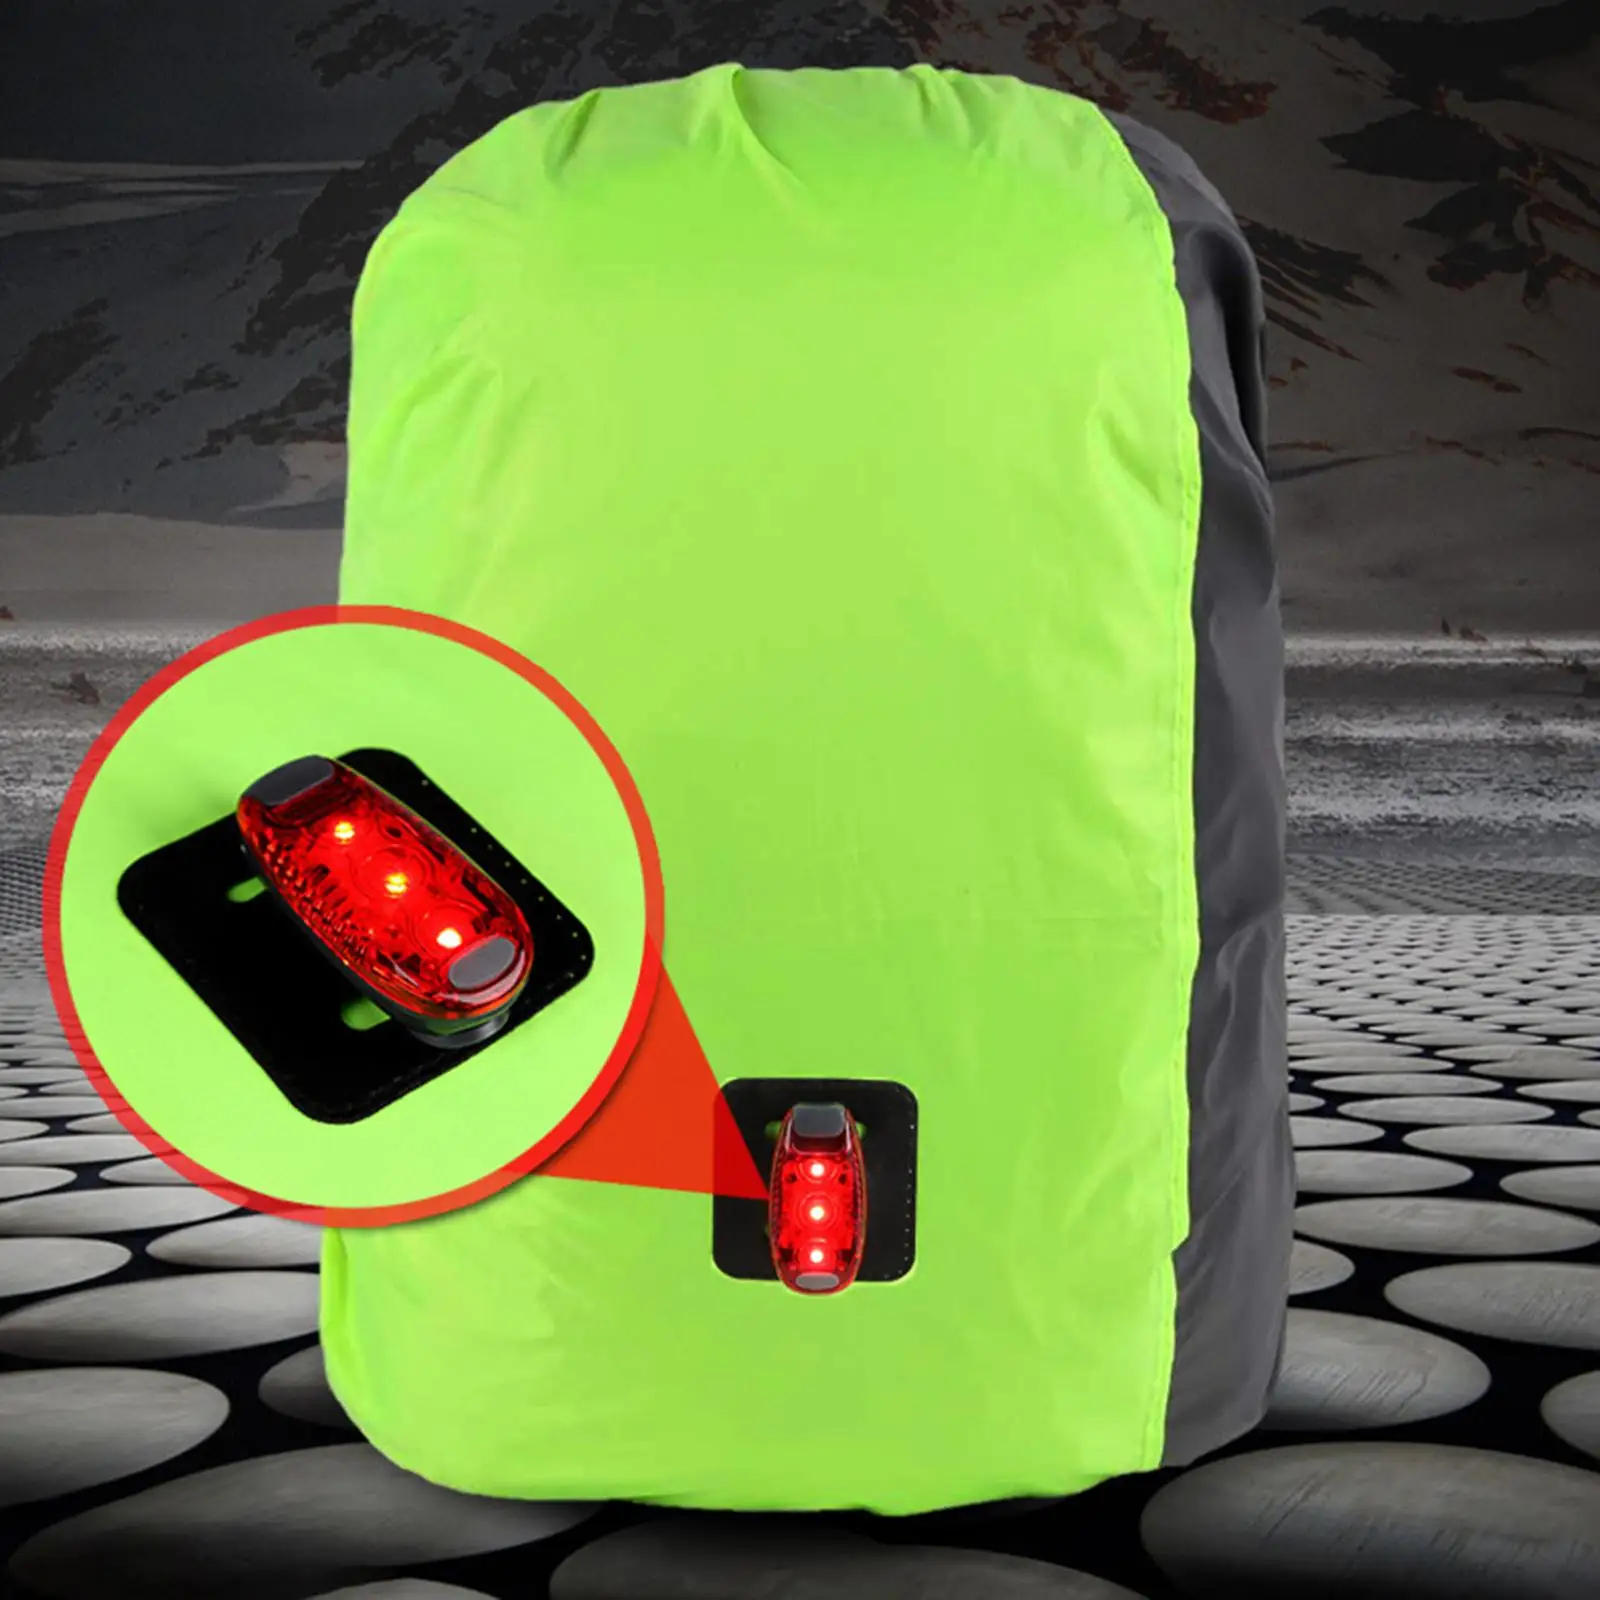 Outdoor Backpack Rain Cover Climbing Travel Ultralight Compact Bag Cover